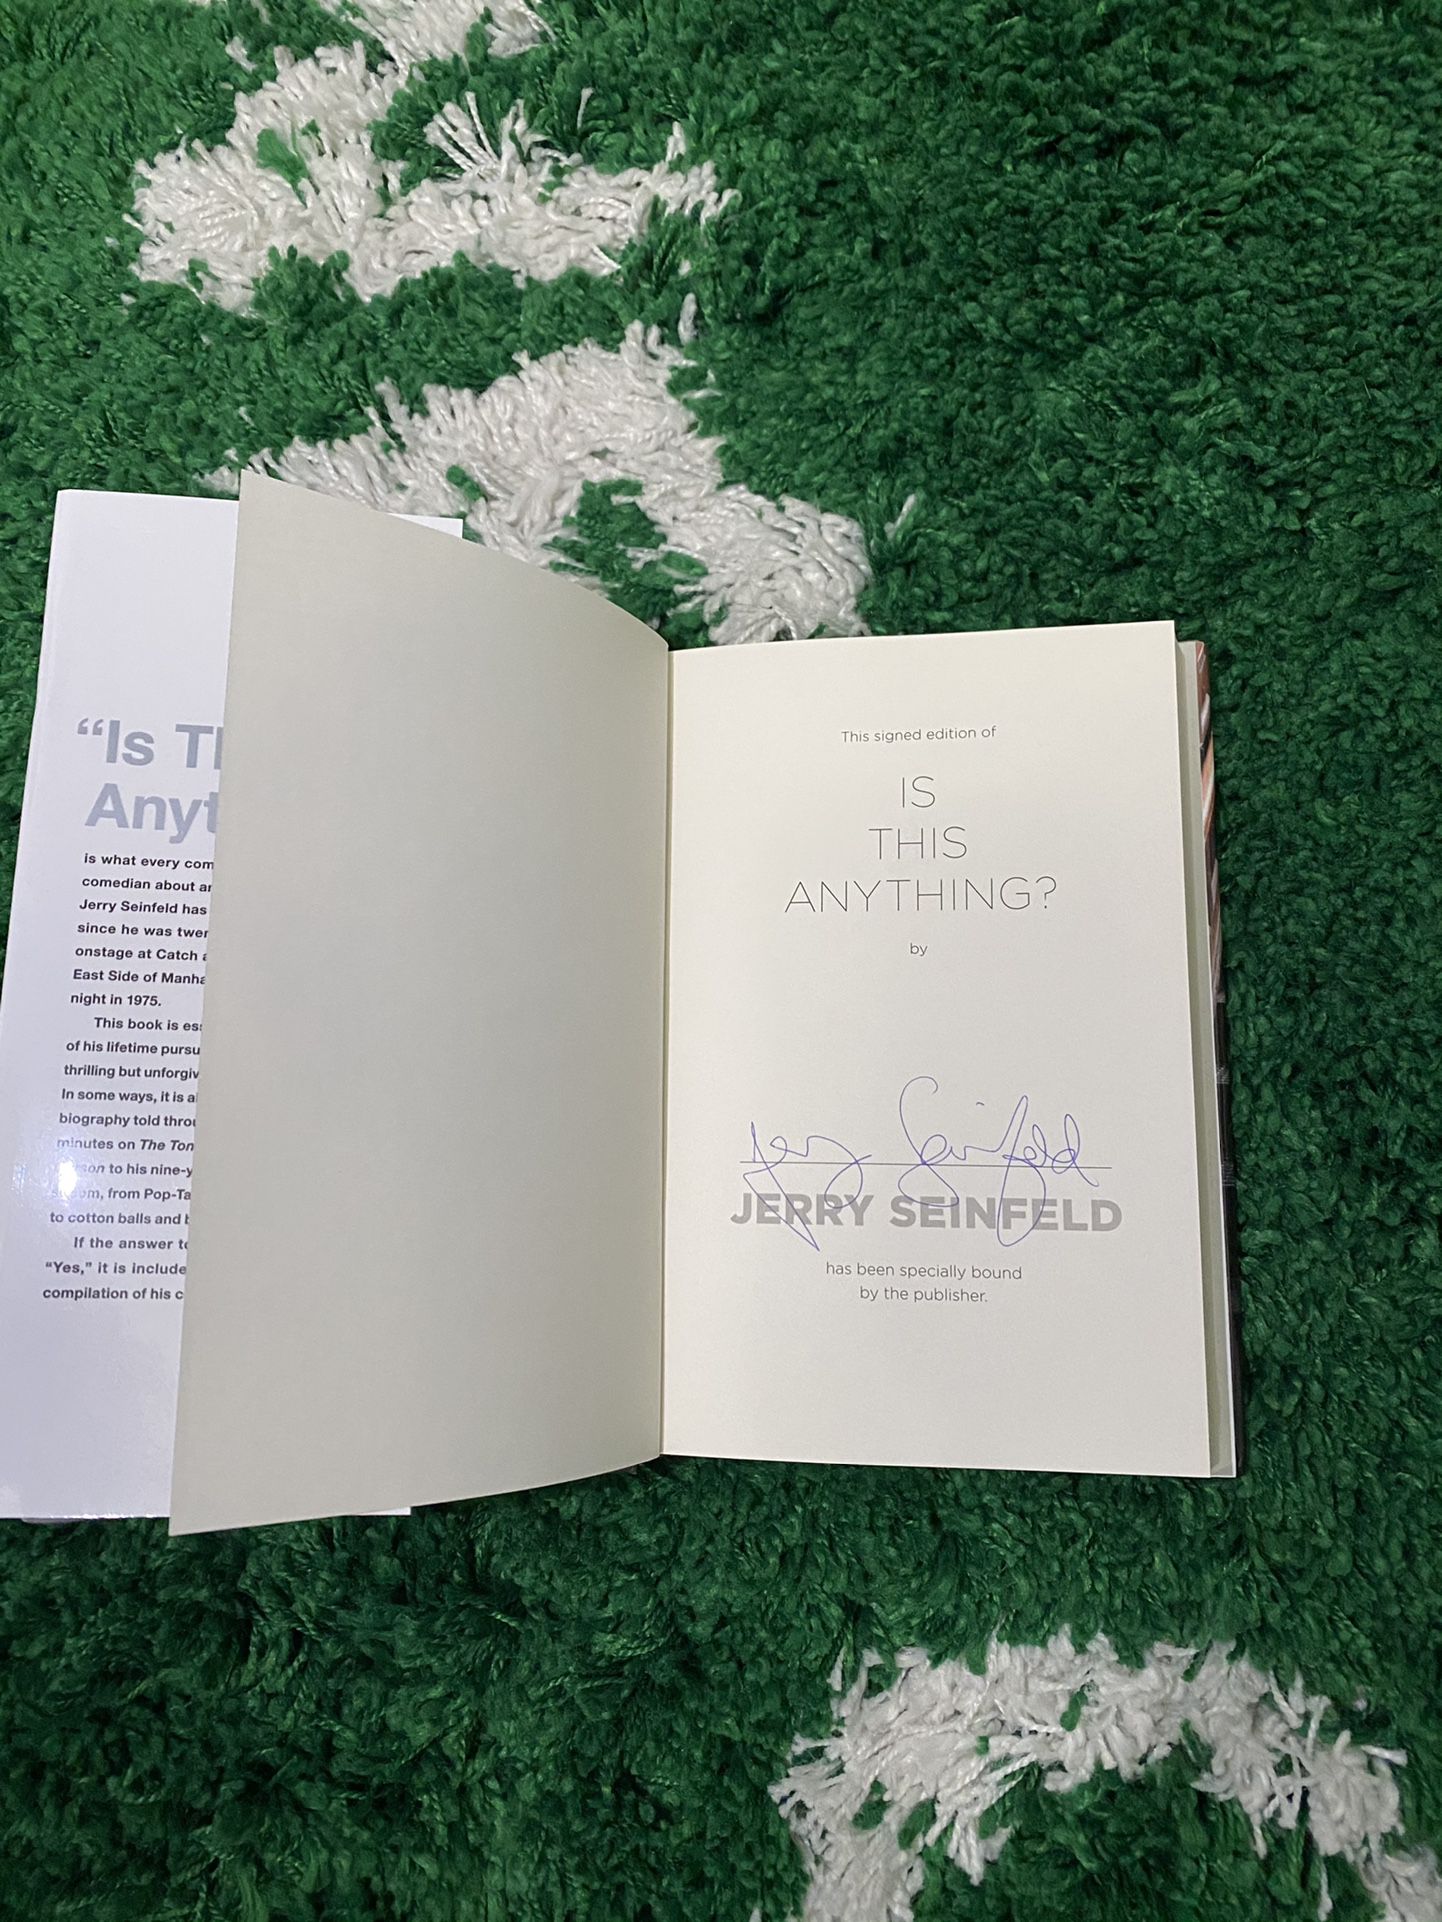 JERRY SEINFELD Signed/Autographed 1st Edition "Is This Anything" Book